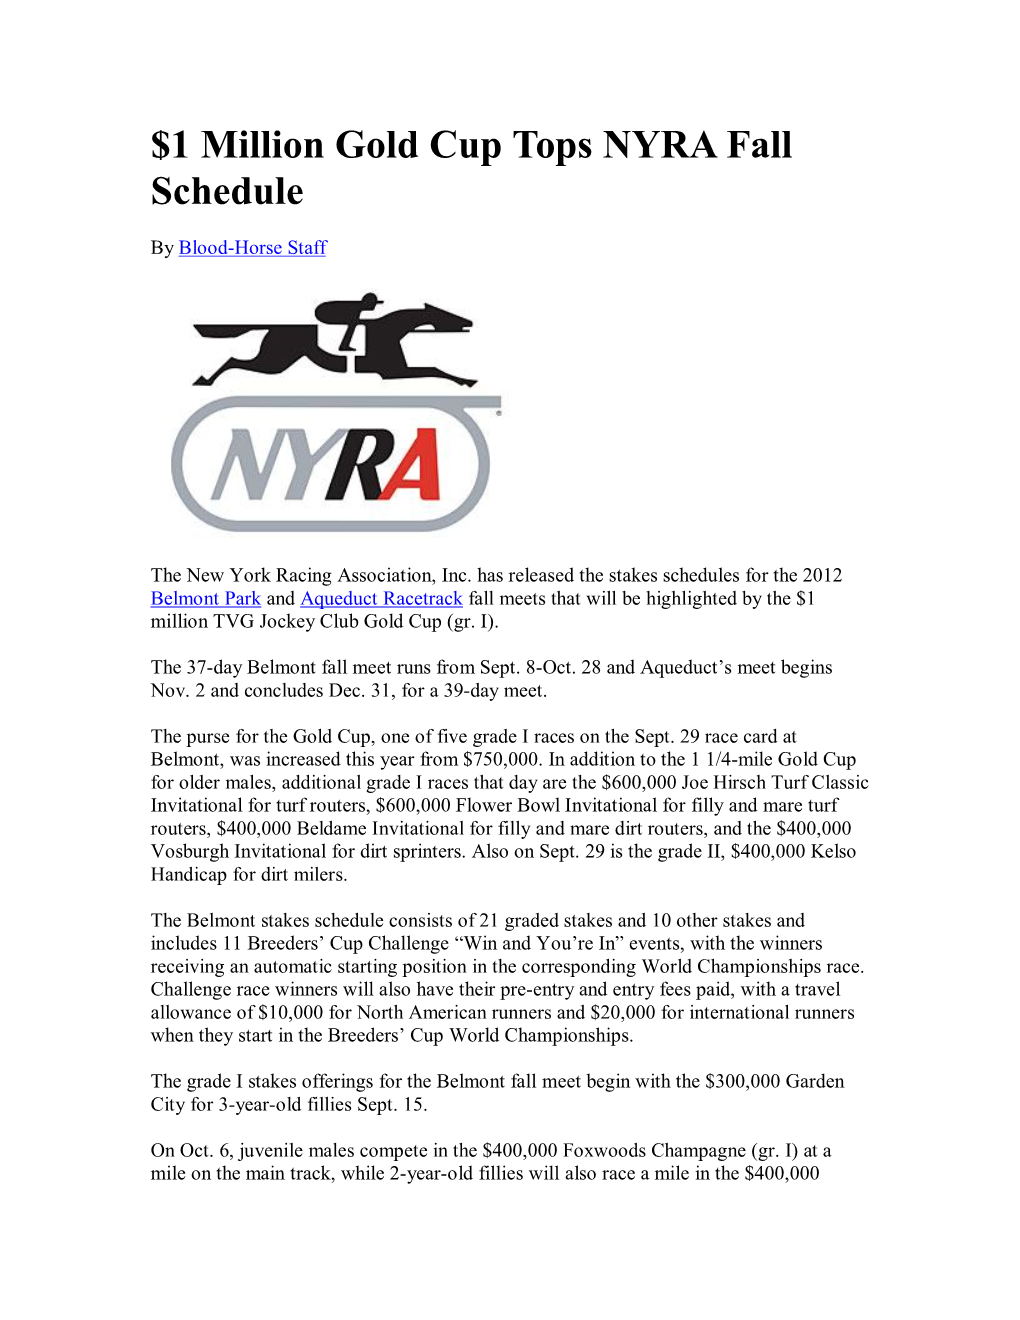 $1 Million Gold Cup Tops NYRA Fall Schedule